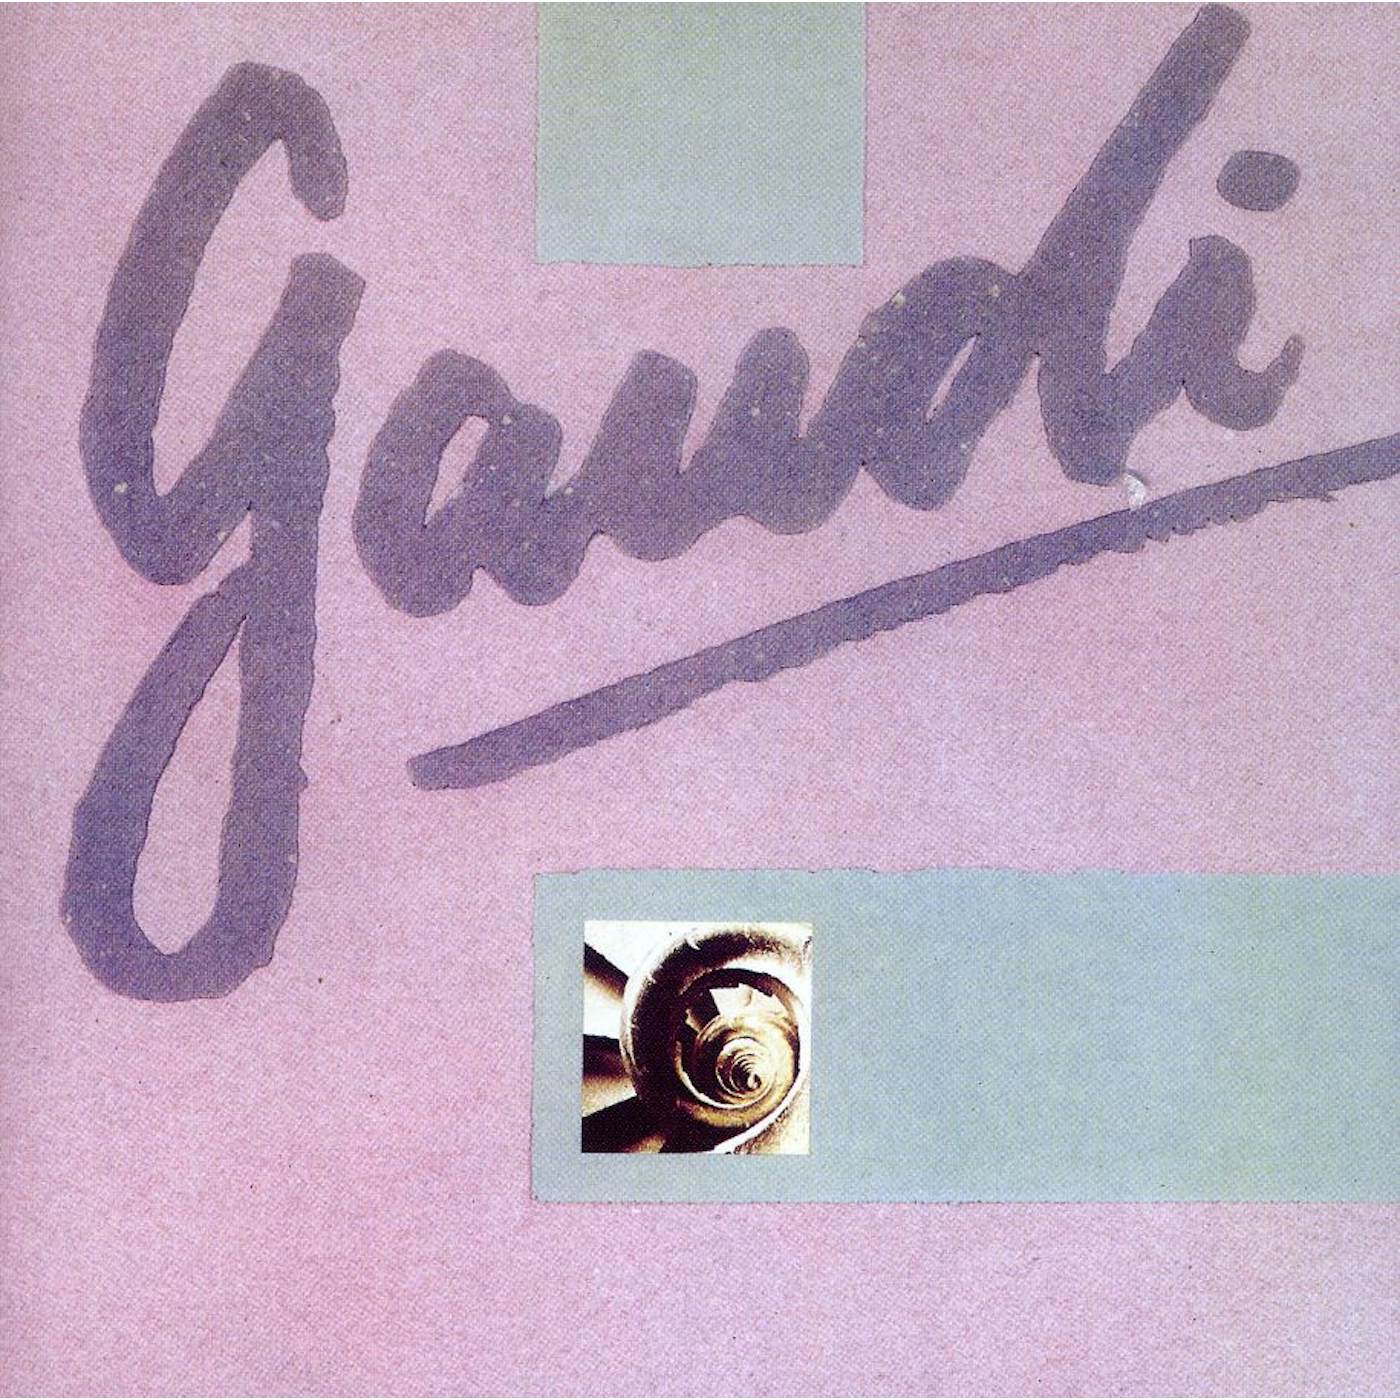 The Alan Parsons Project GAUDI CD